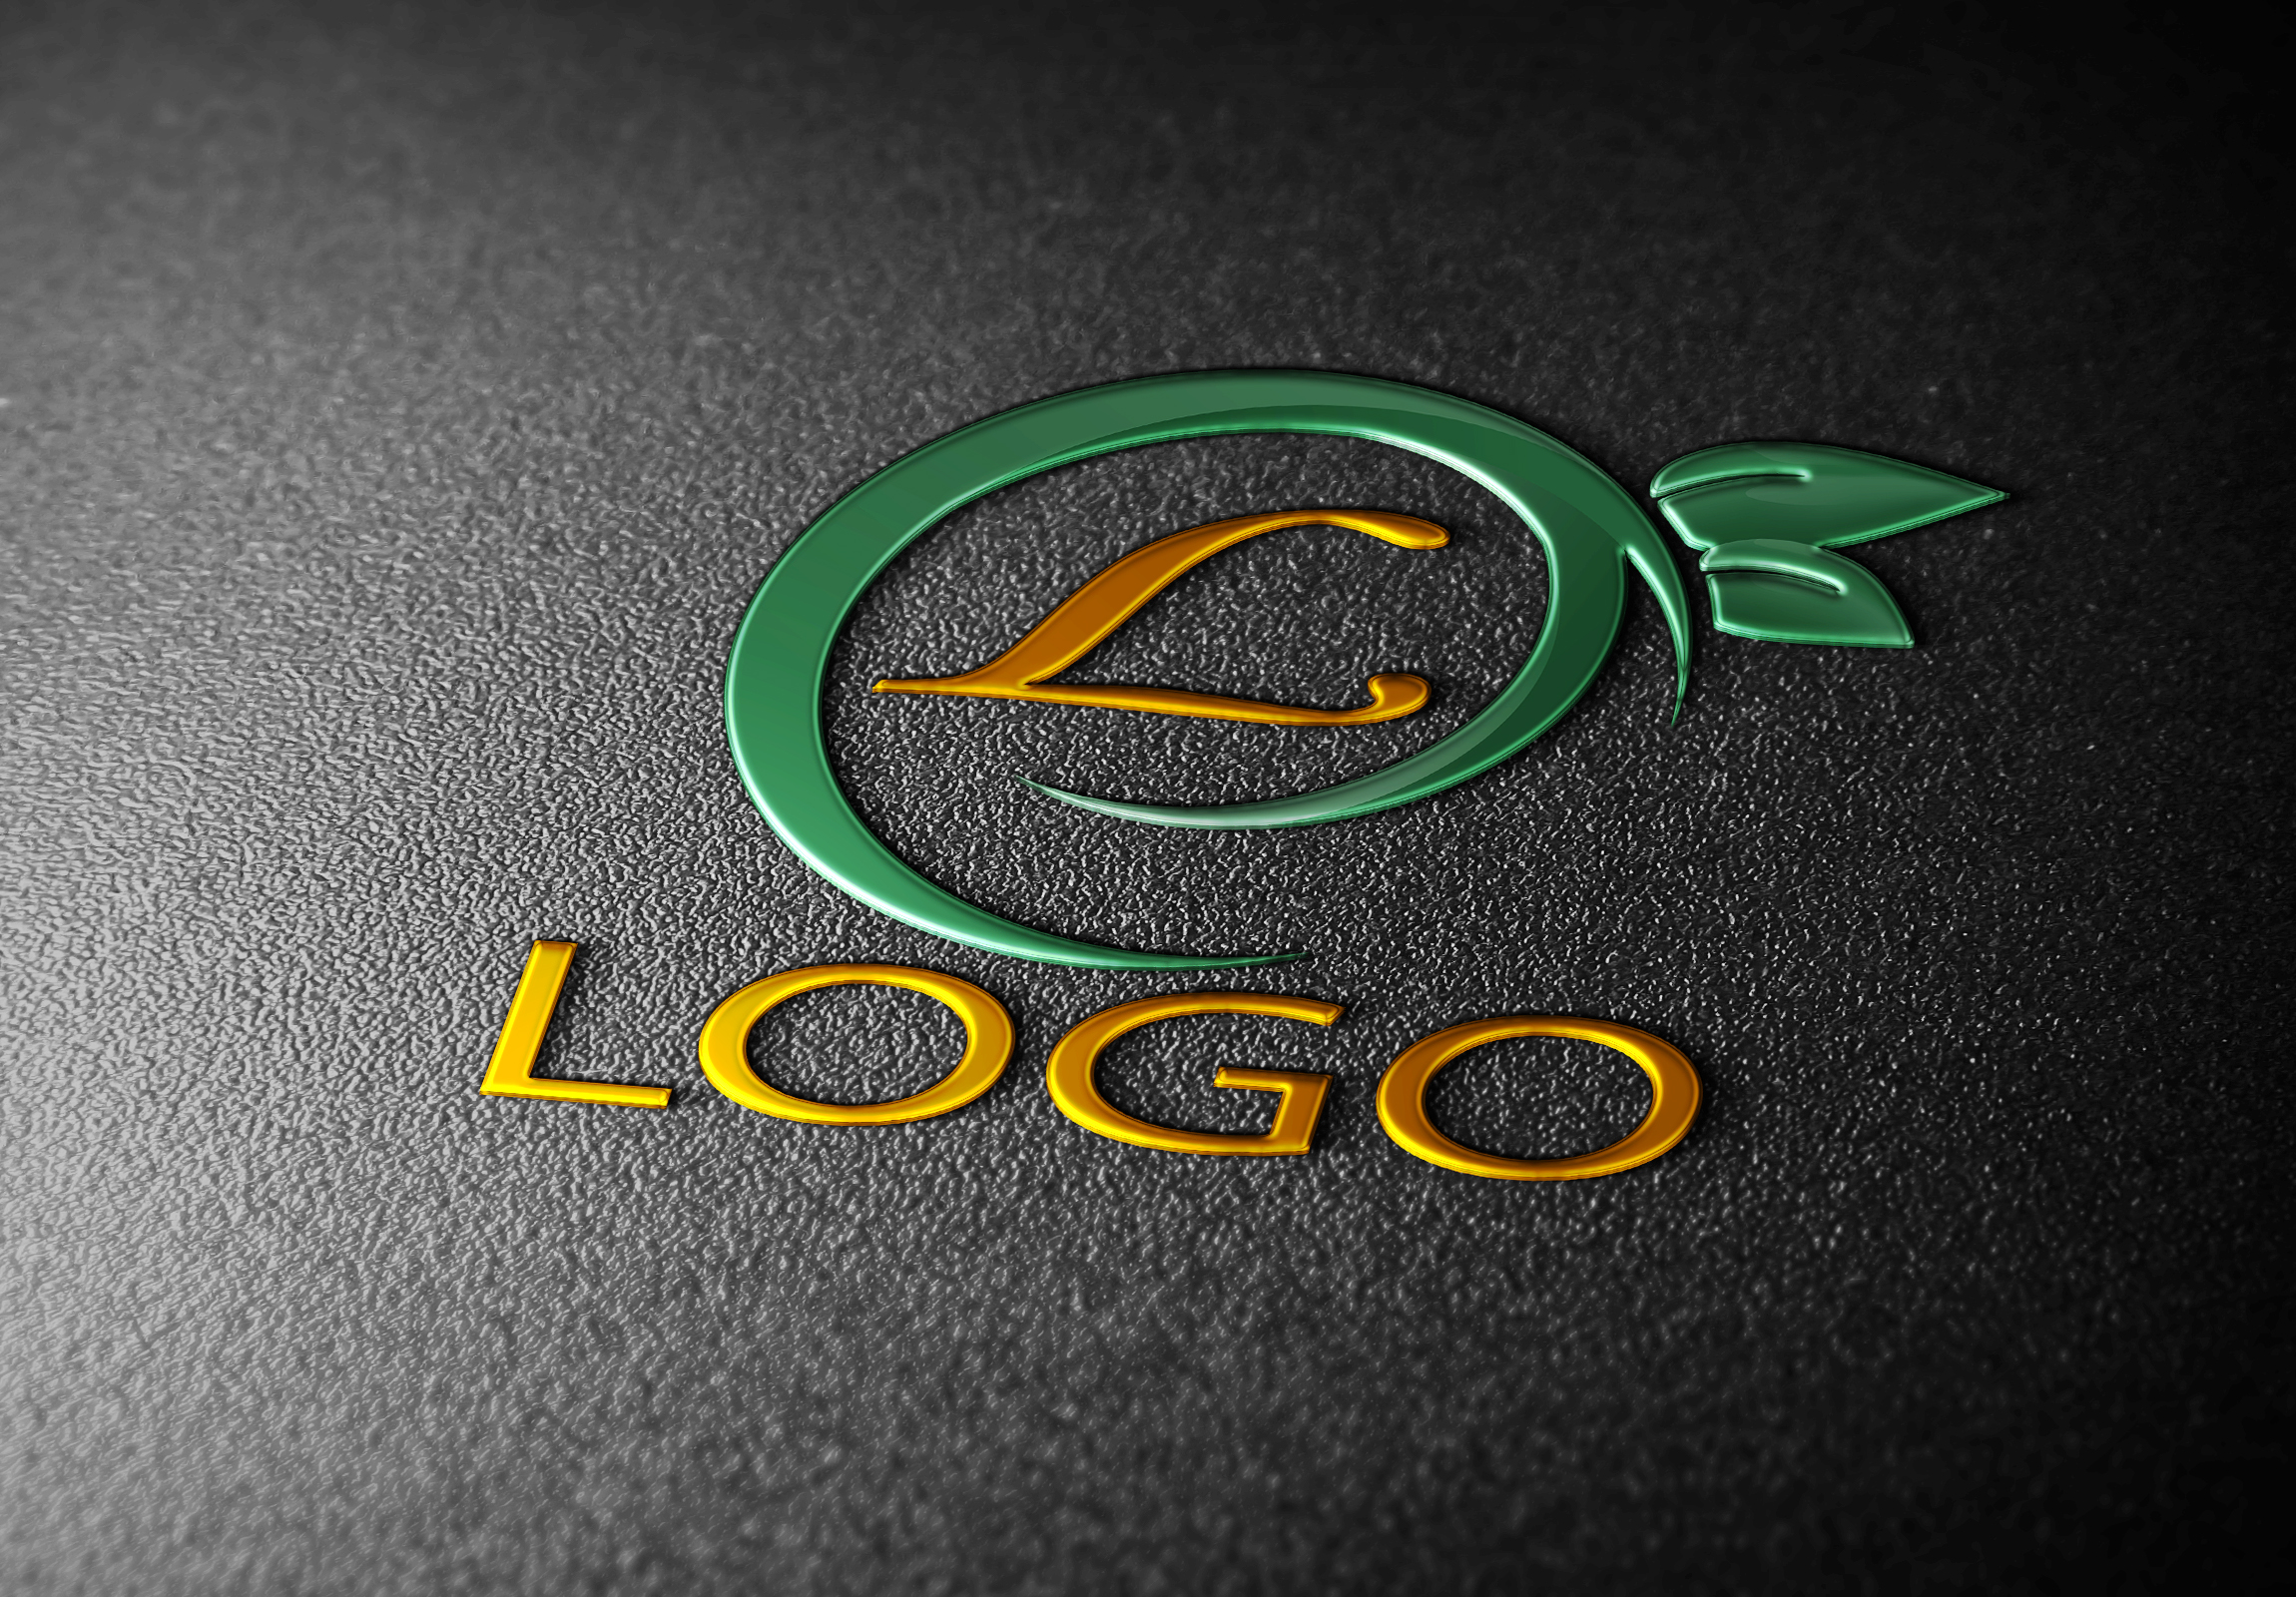 Download i will make your logo 3d mockup for $10 - SEOClerks